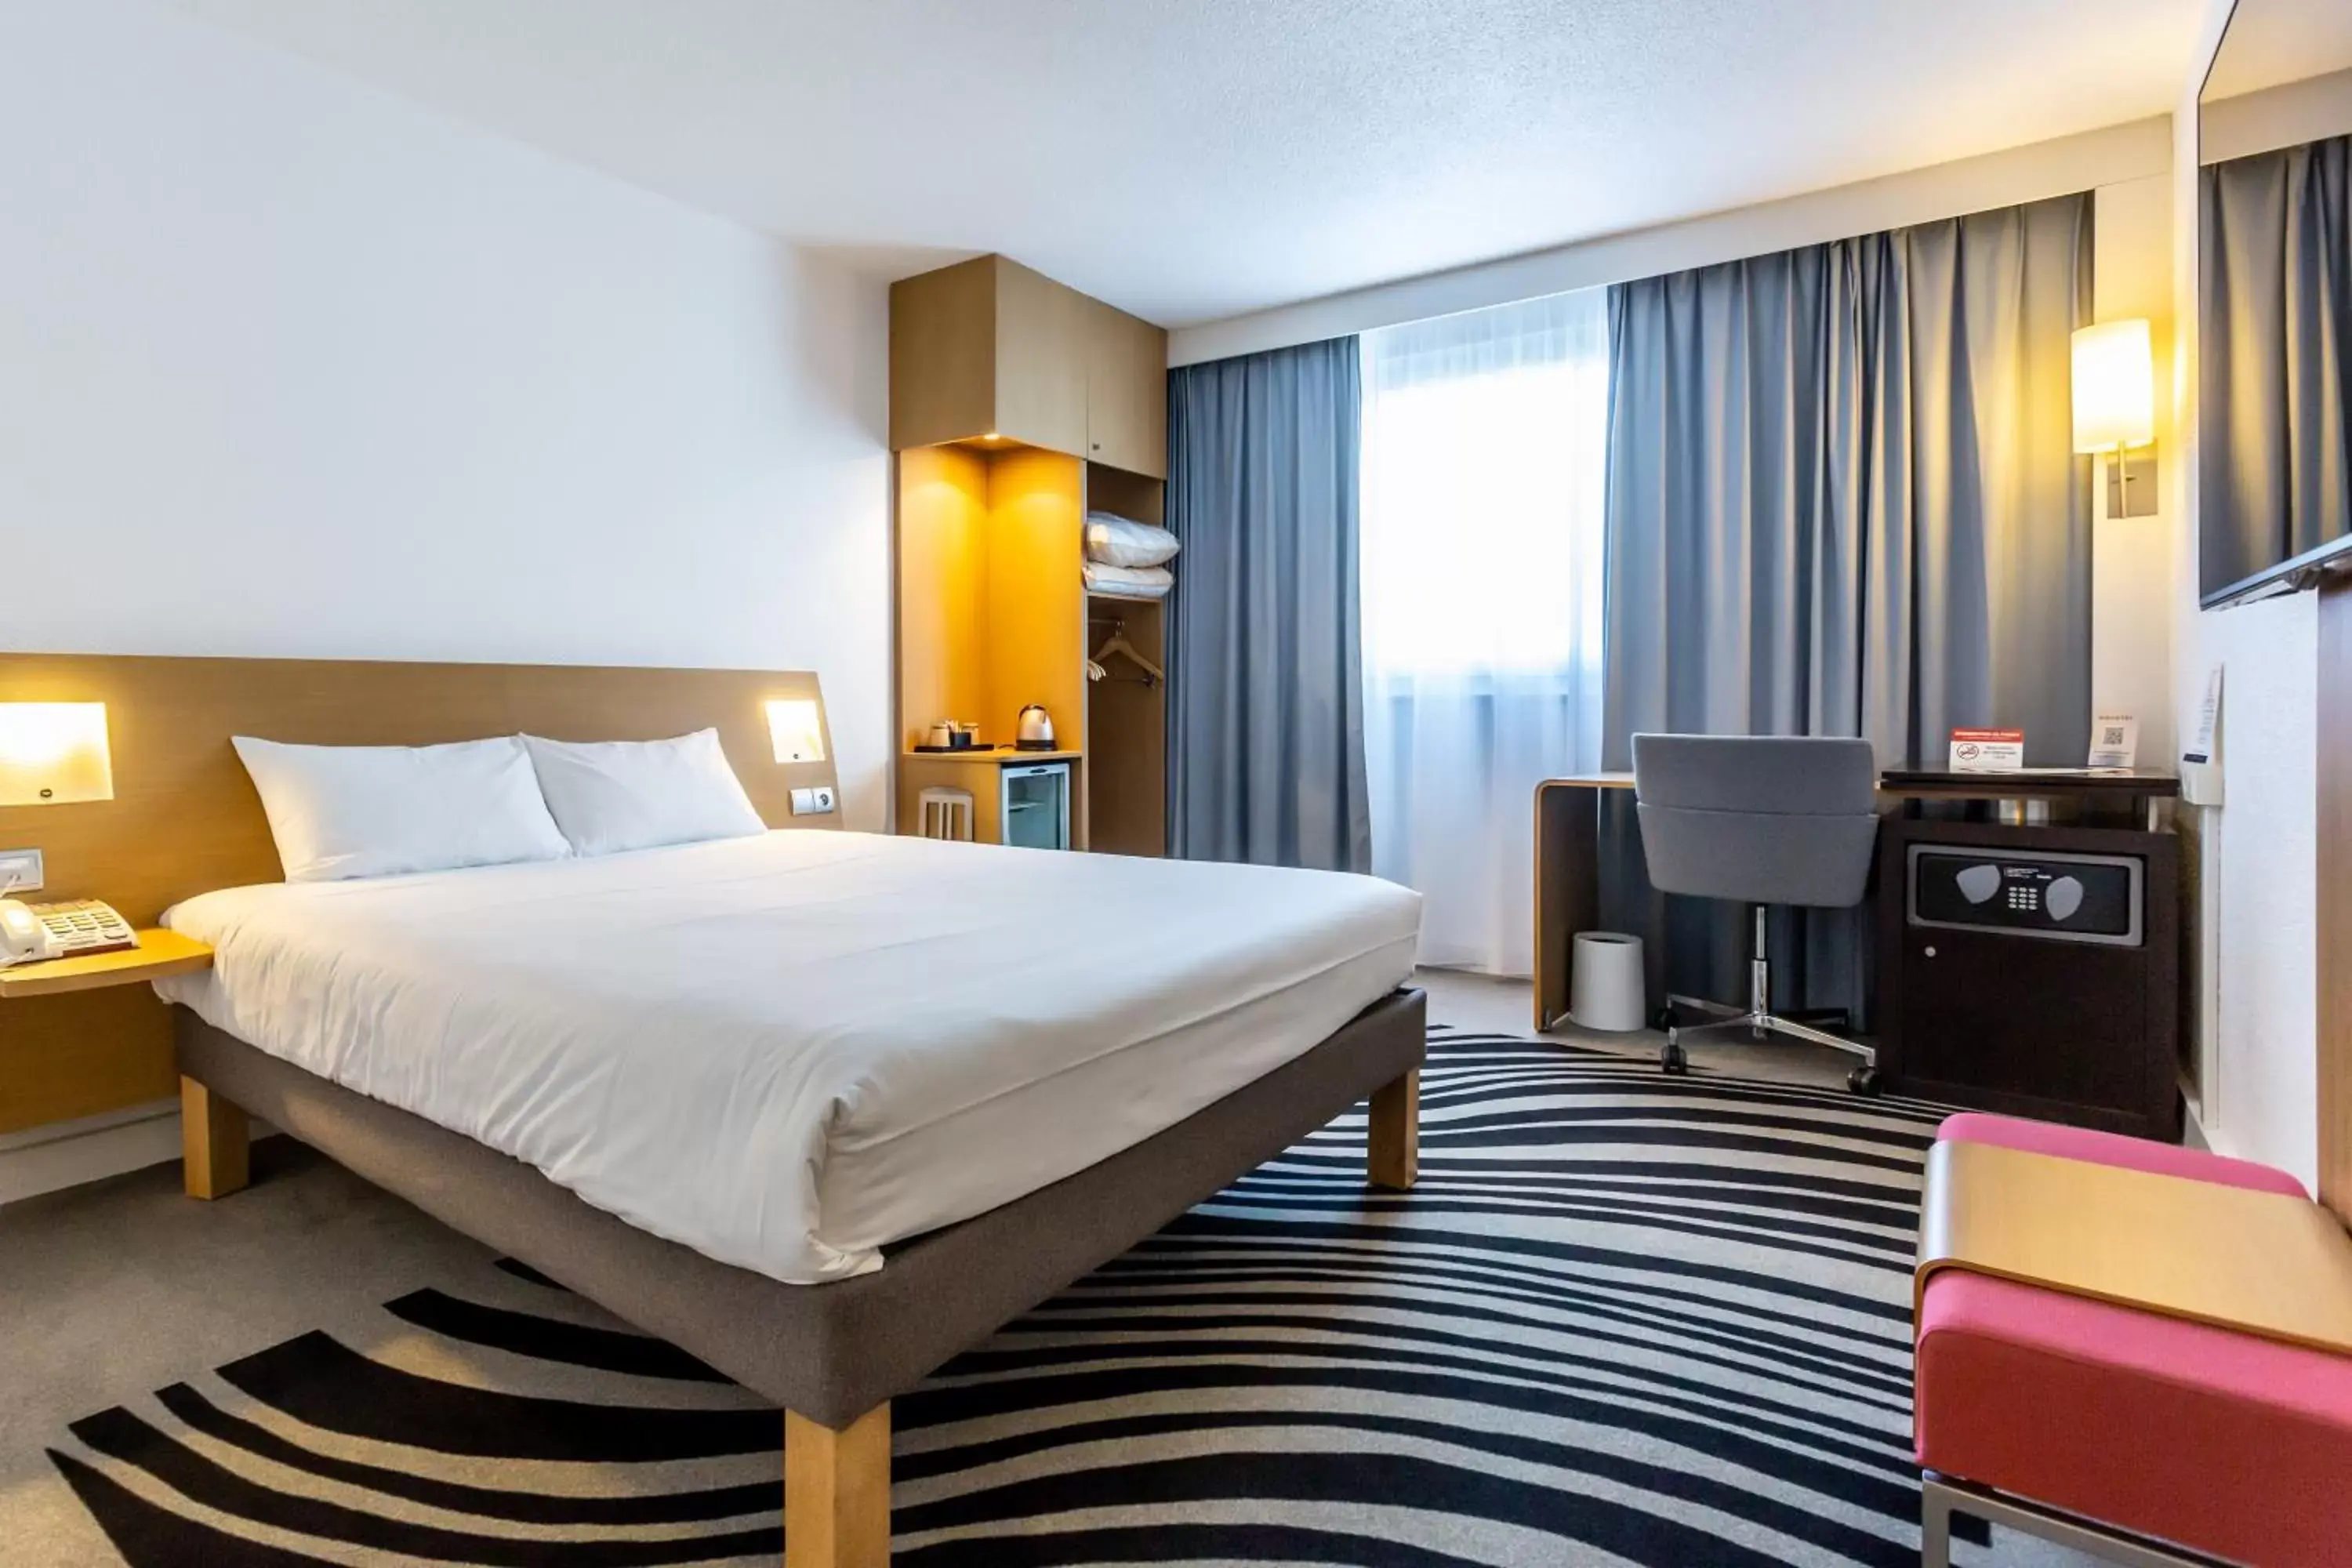 Facility for disabled guests, Bed in Novotel Bourges